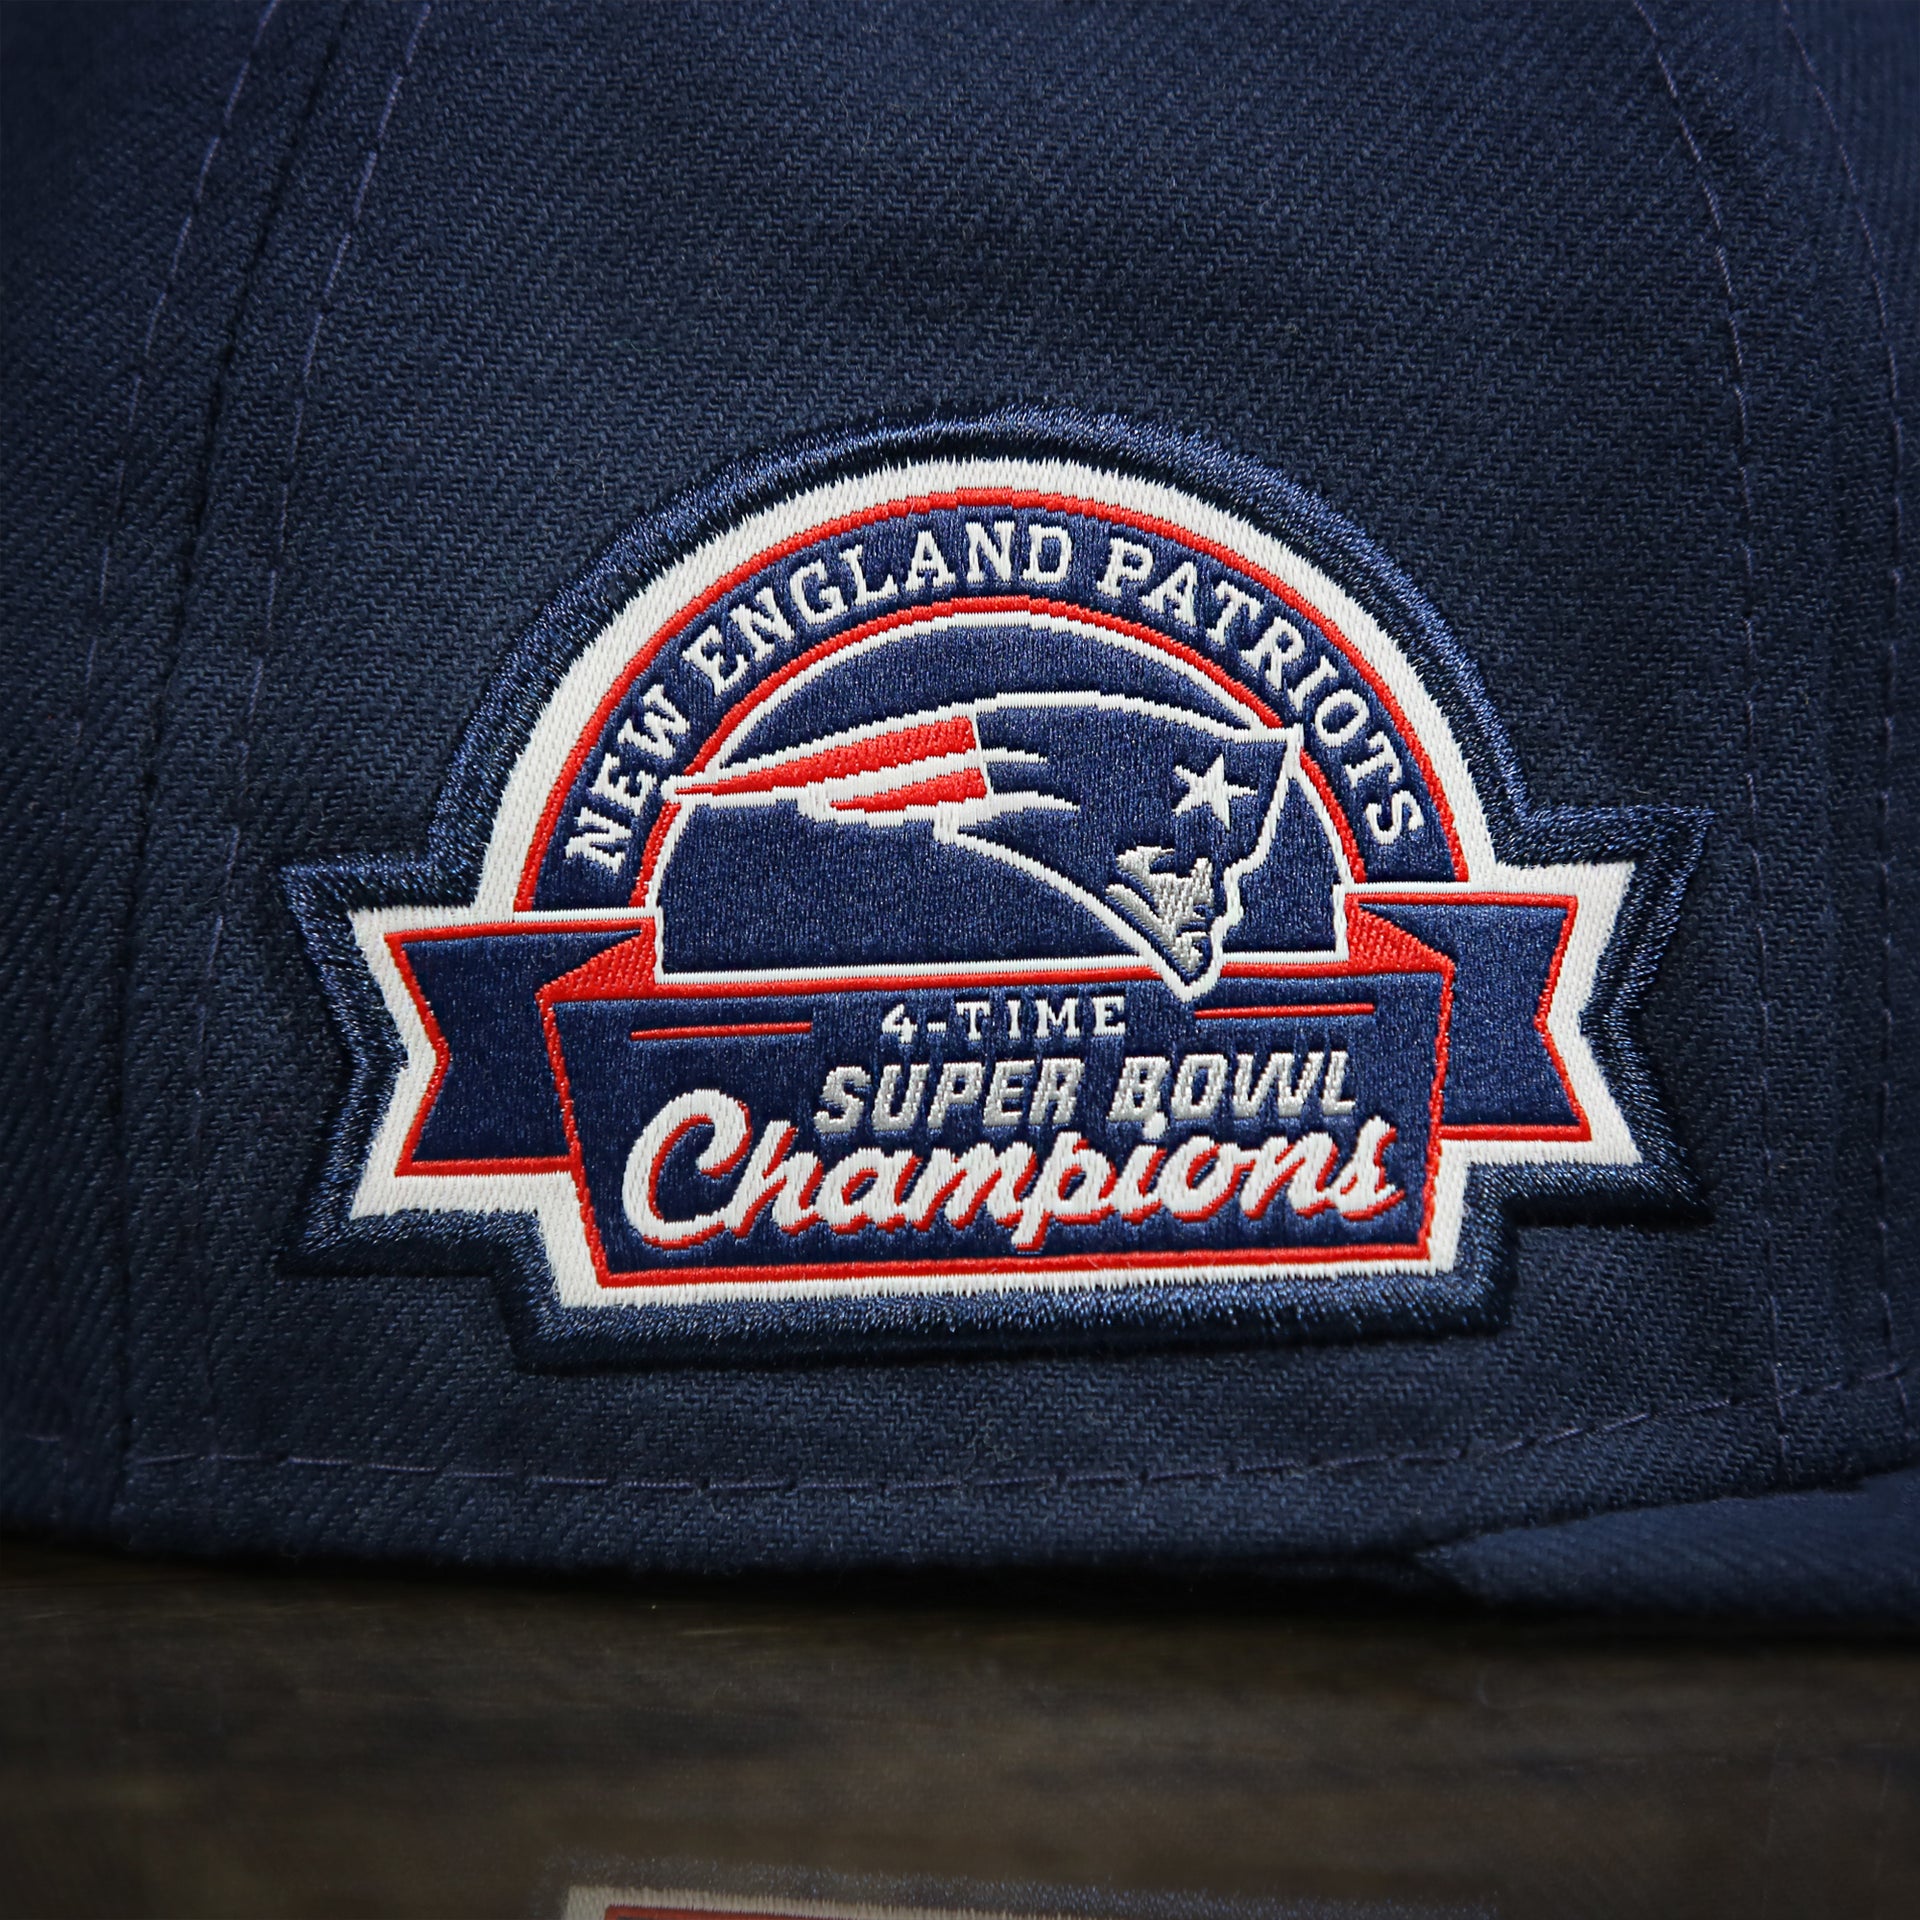 super bowl champion patch on the New England Patriots Throwback 4X Super Bowl Champions Snapback Hat